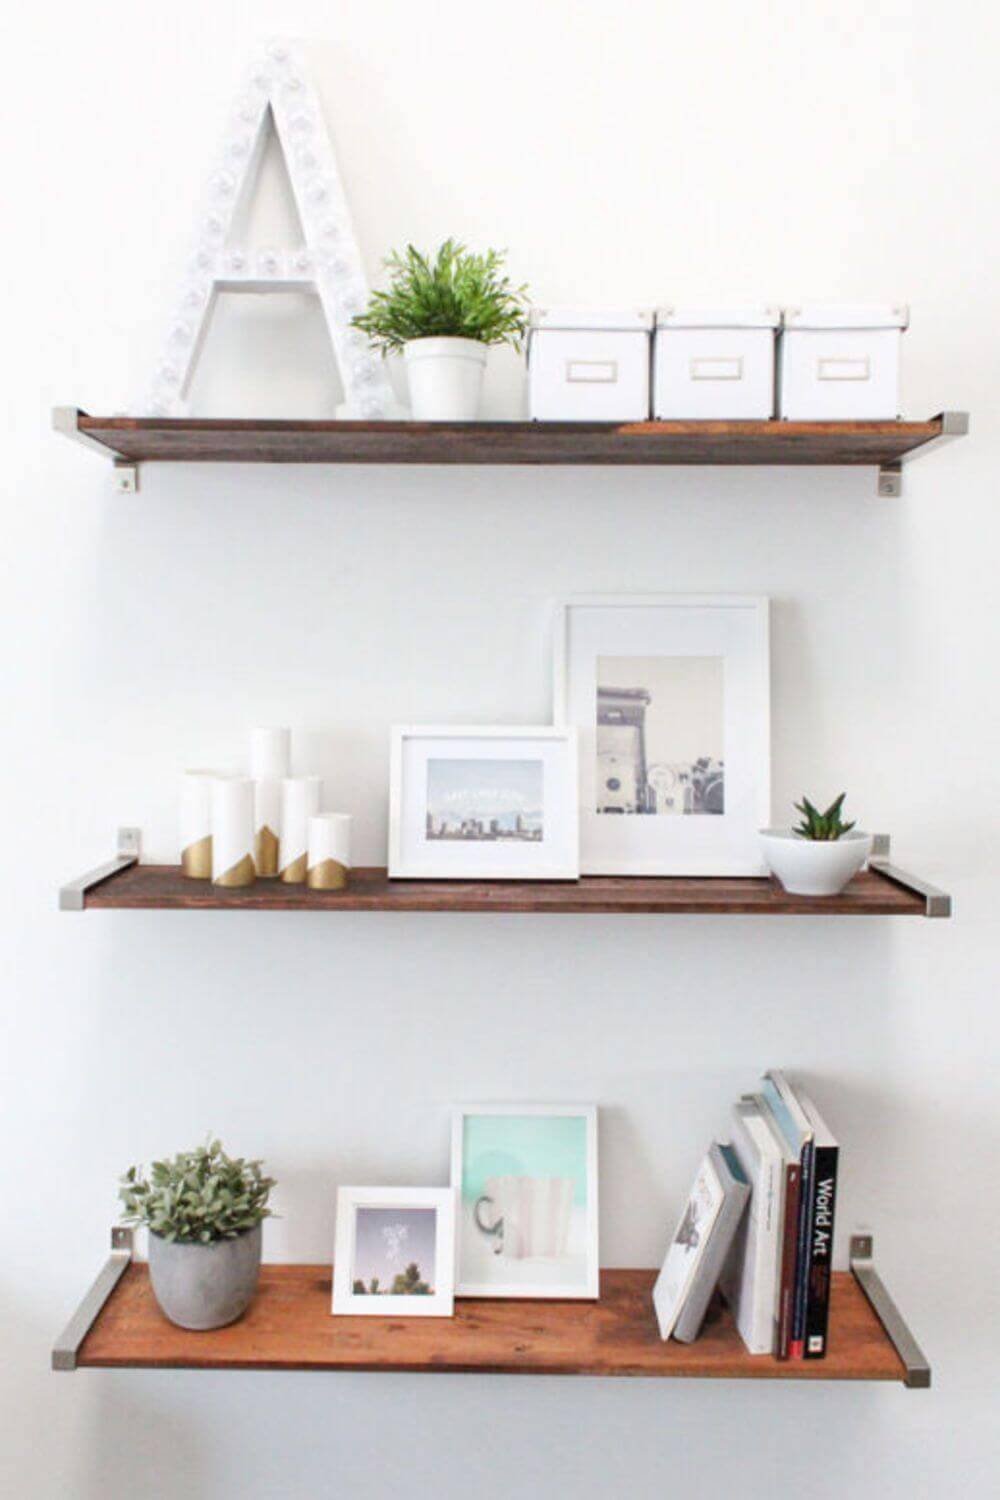 Distressed Wood Wall Shelving Ideas for Small Spaces